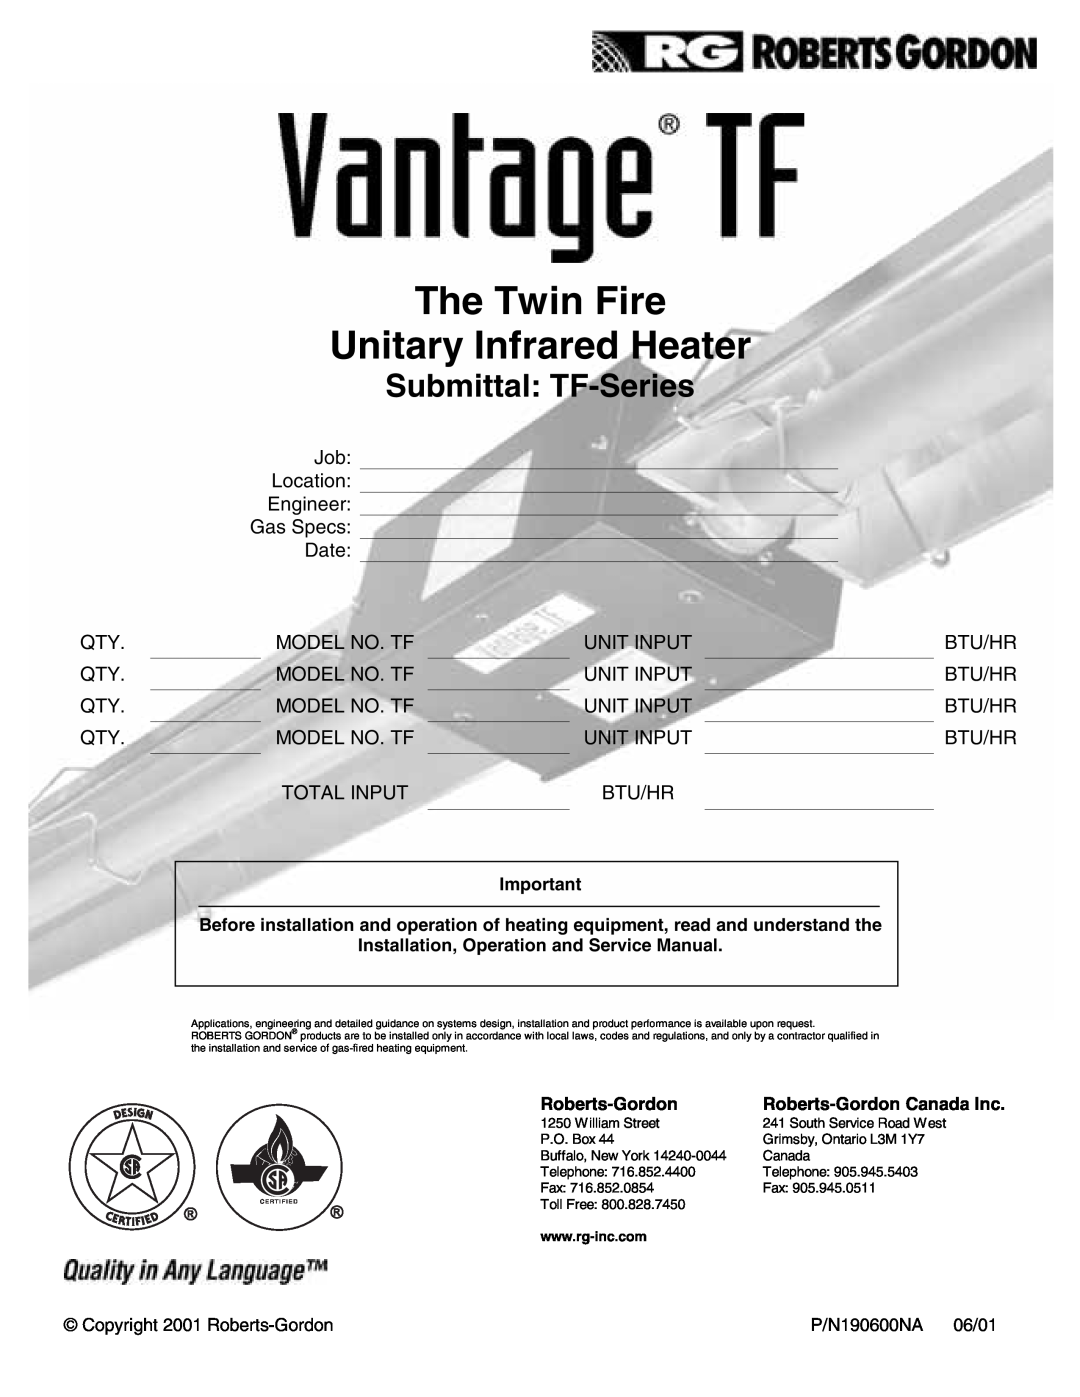 Roberts Gorden service manual The Twin Fire Unitary Infrared Heater, Submittal TF-Series 